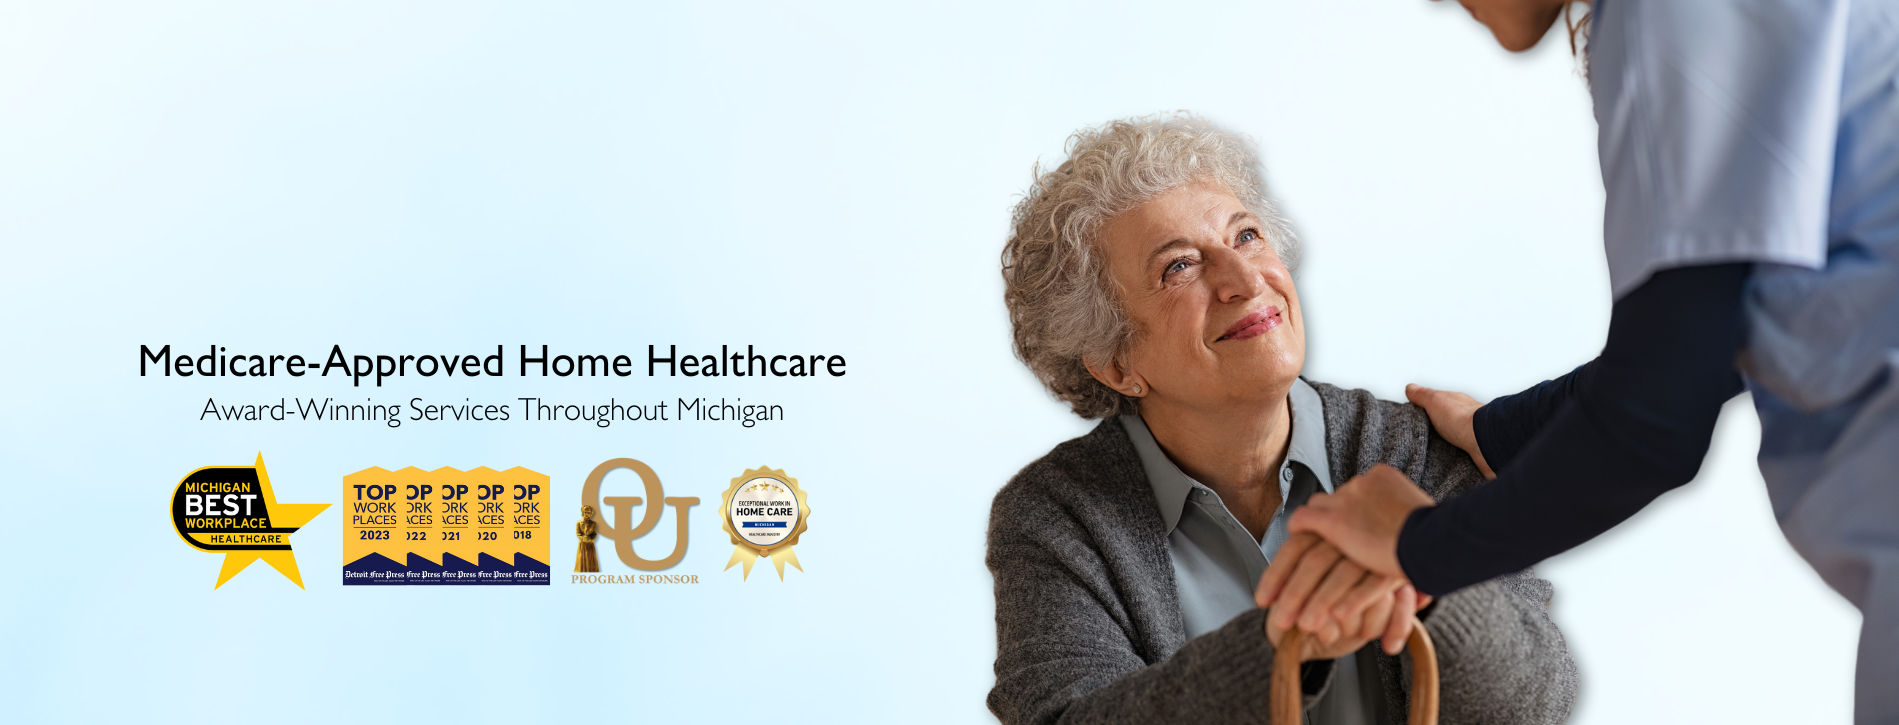 Medicare-Approved Home Healthcare